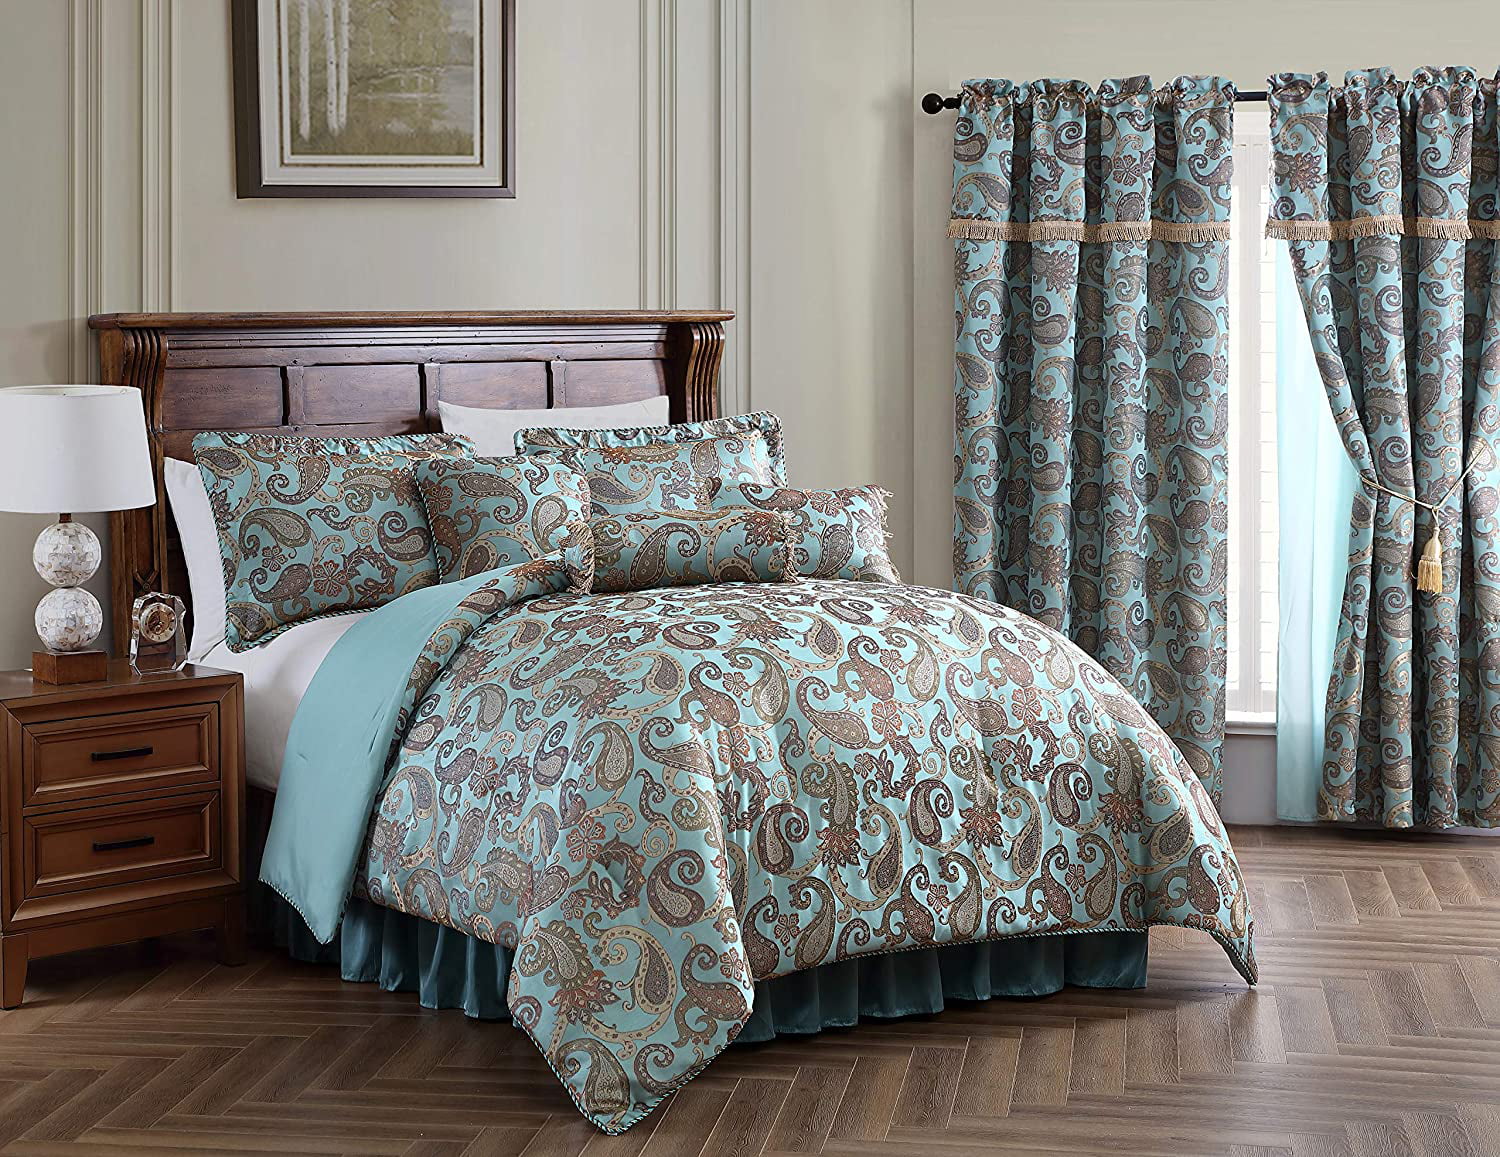 HEAVY PAISLEY JACQUARD QUILTED LUXURY  7 PIECE COMFORTER SET VALANCE SHEET 